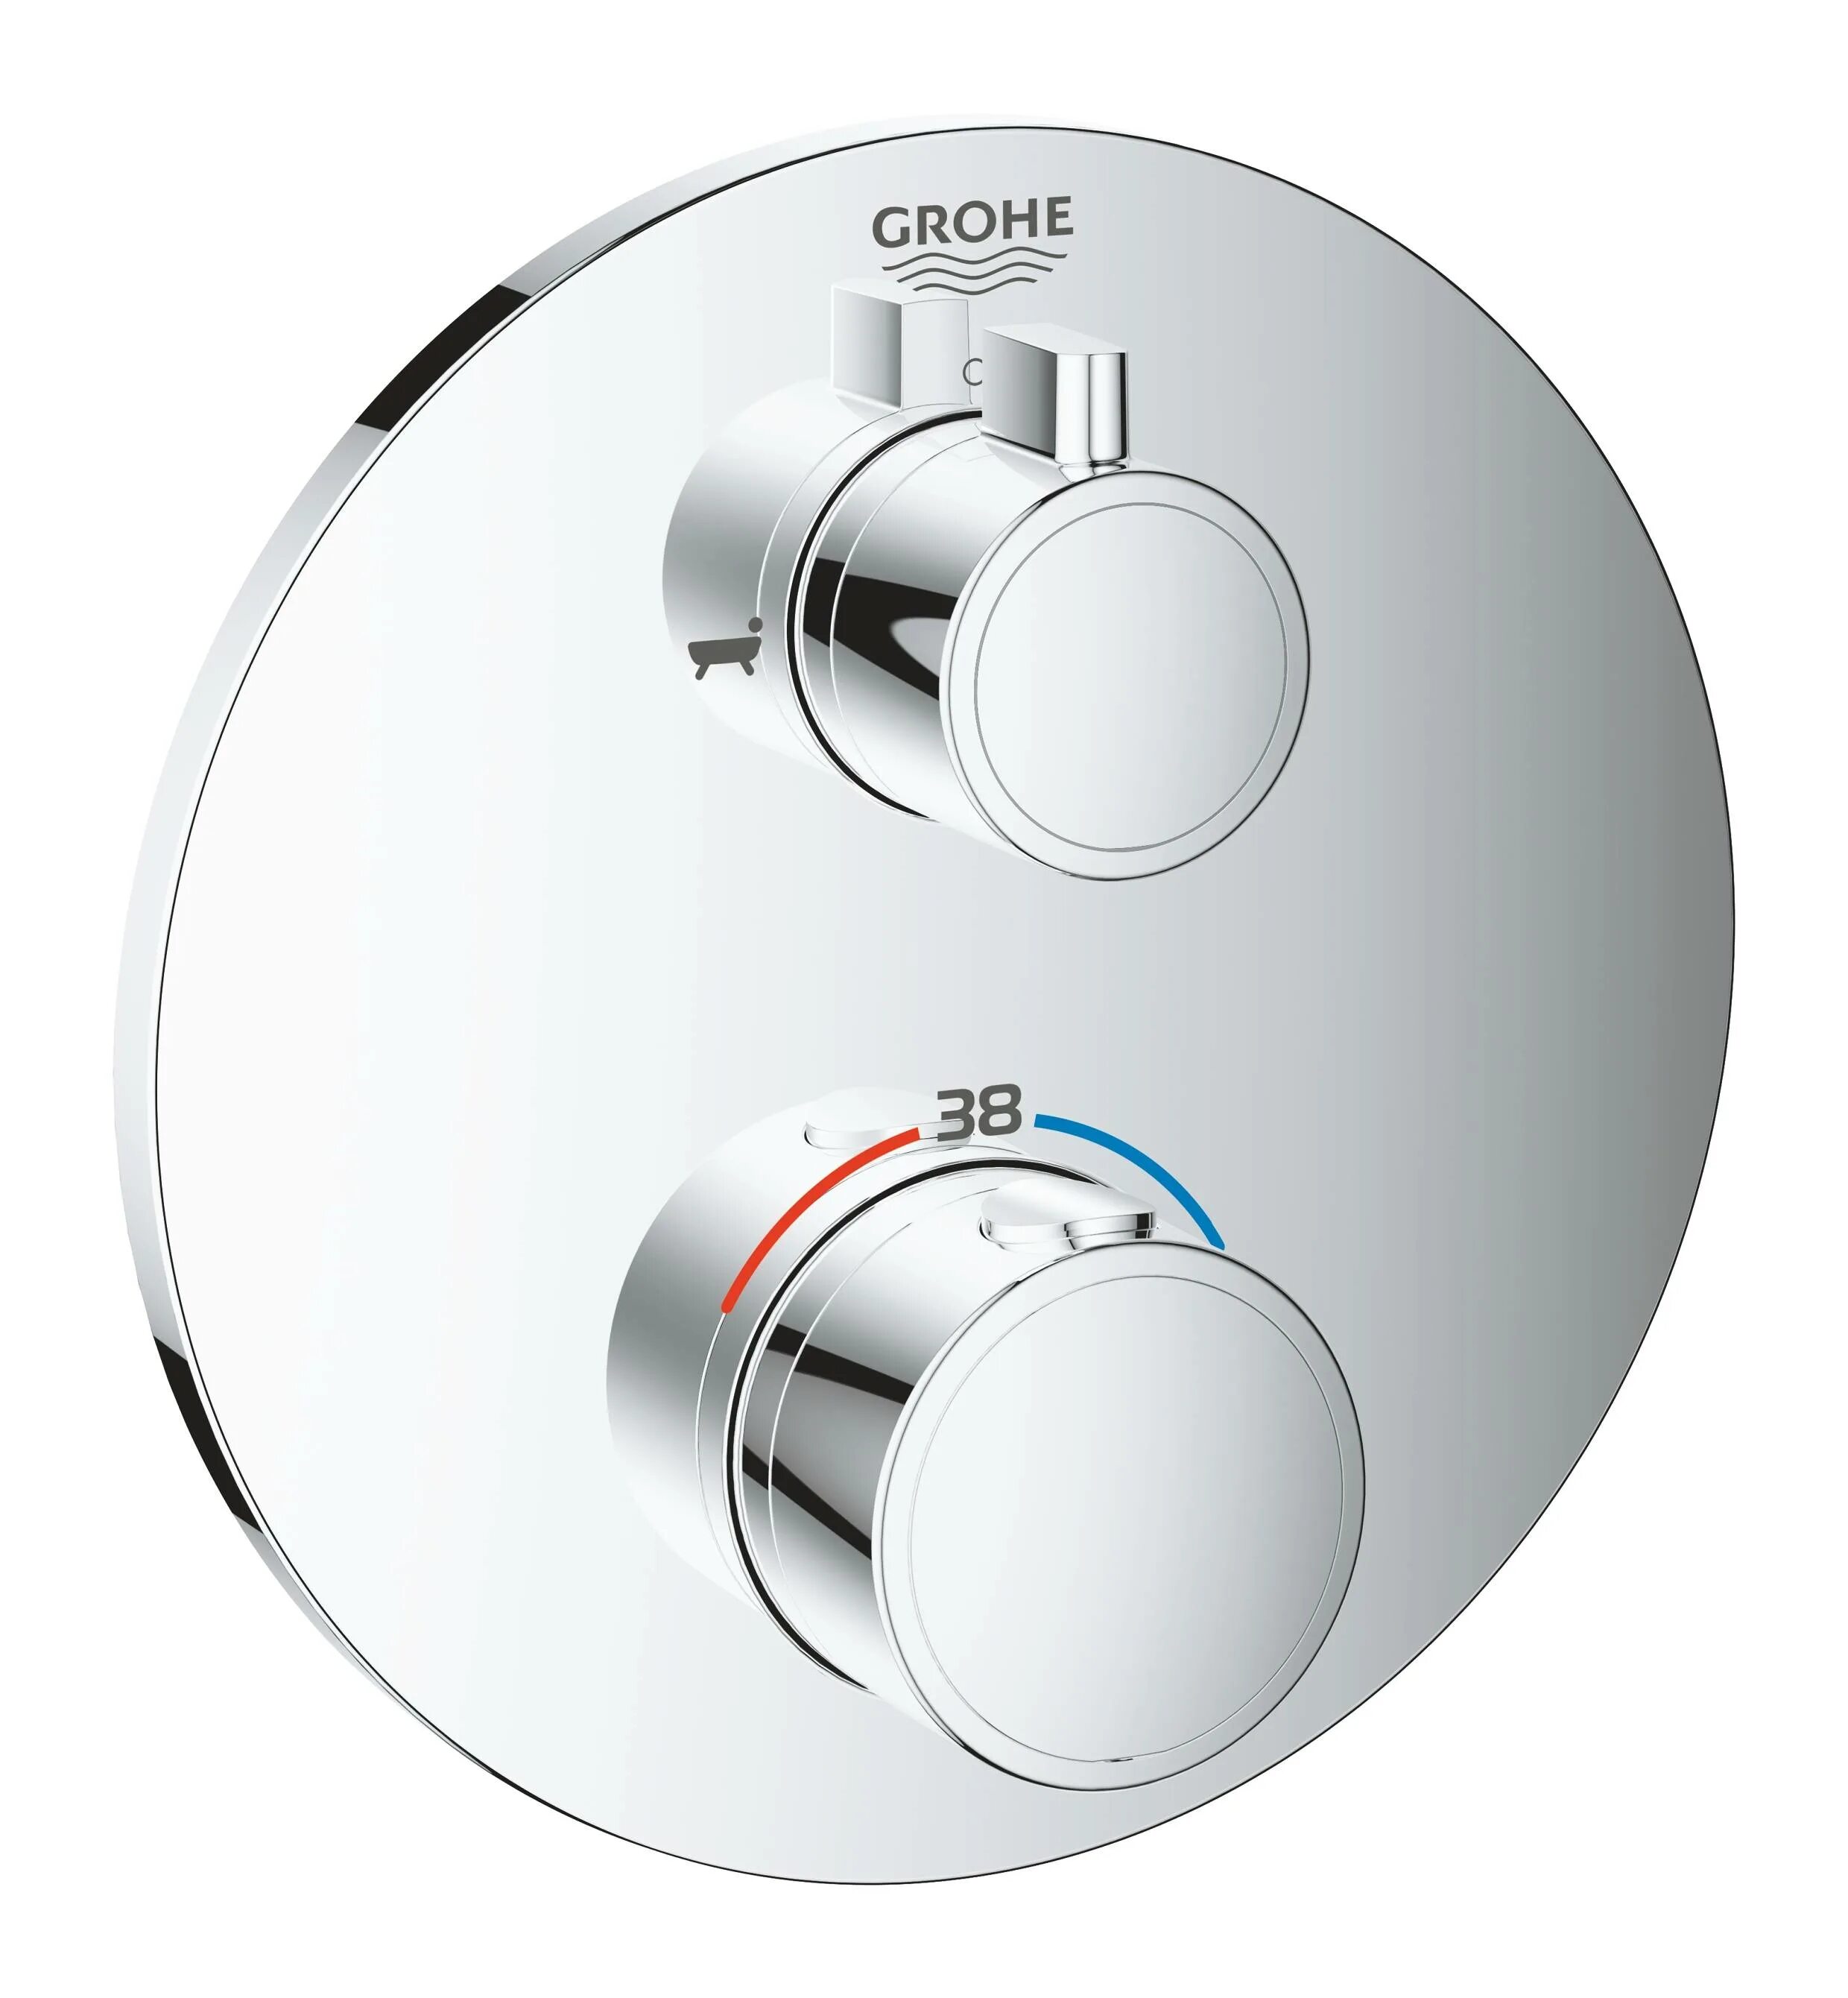 Душа grohe grohtherm. Grohe Grohtherm 24076000. Grohe 47175000. Термостат Grohe Grohtherm. Grohe Grohtherm 24075000.